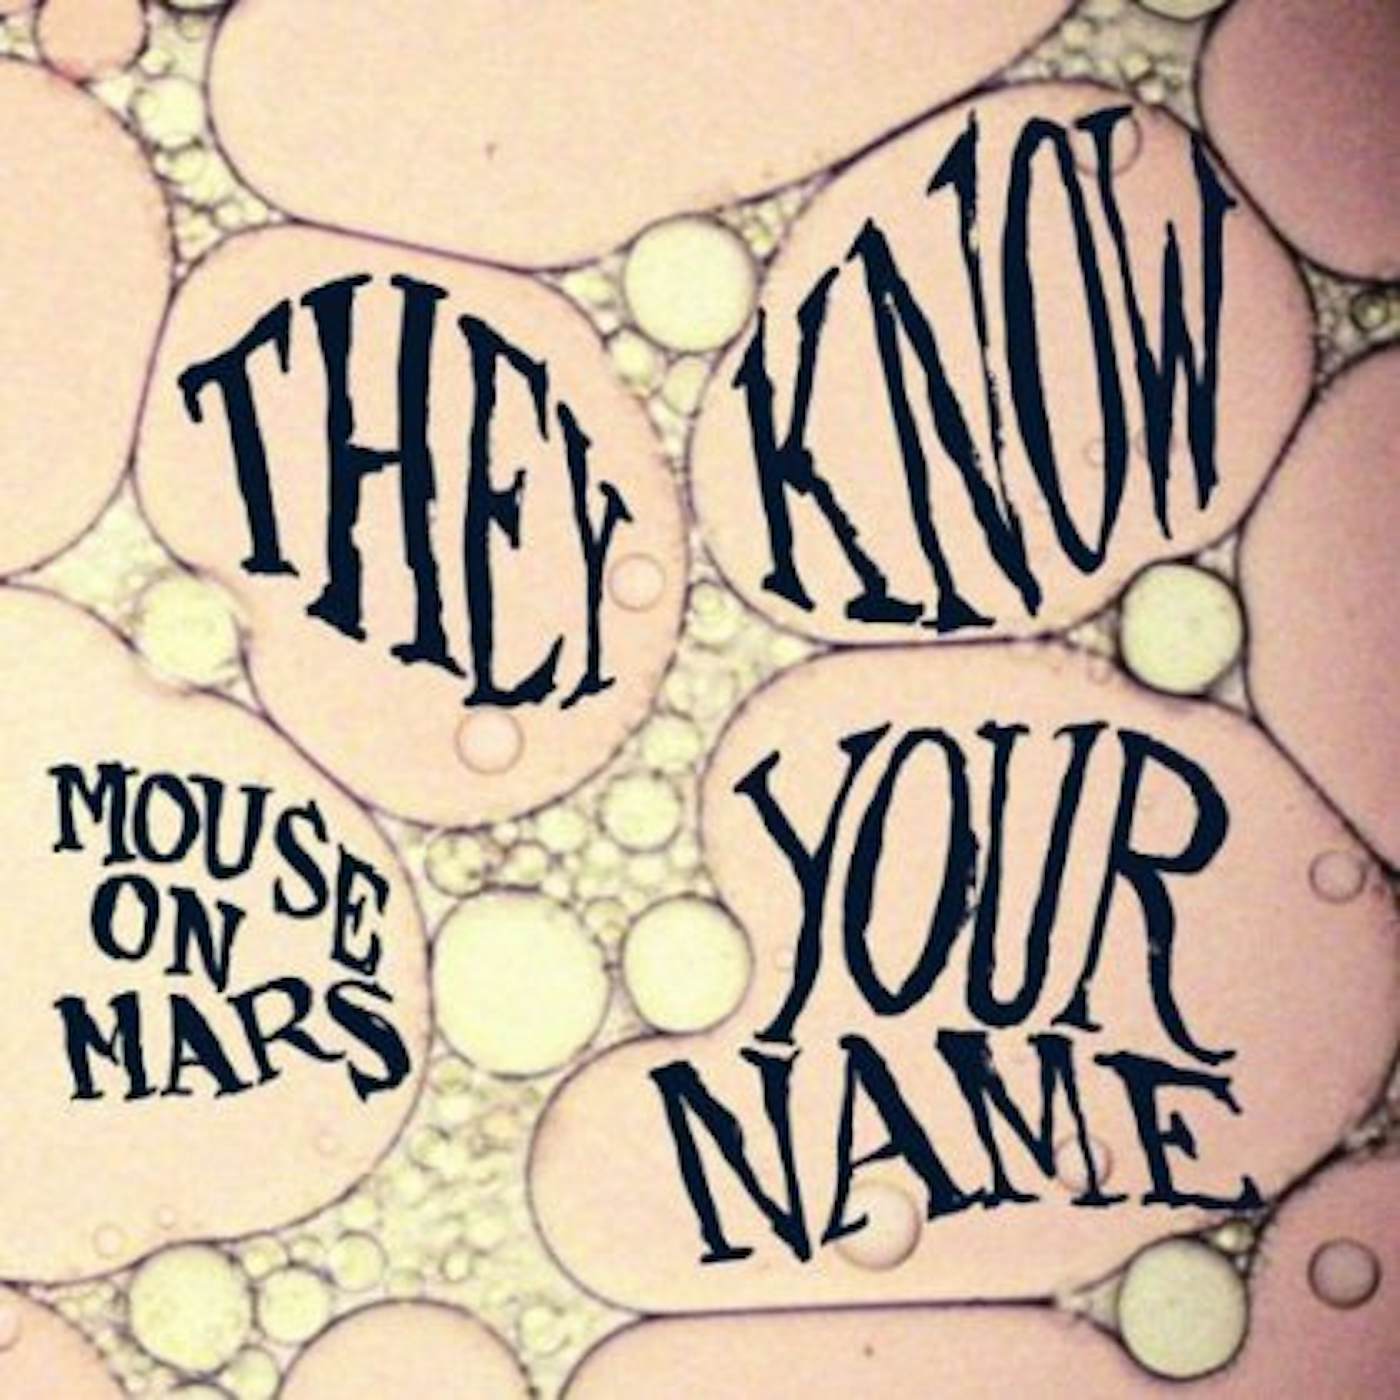 Mouse On Mars They Know Your Name Vinyl Record